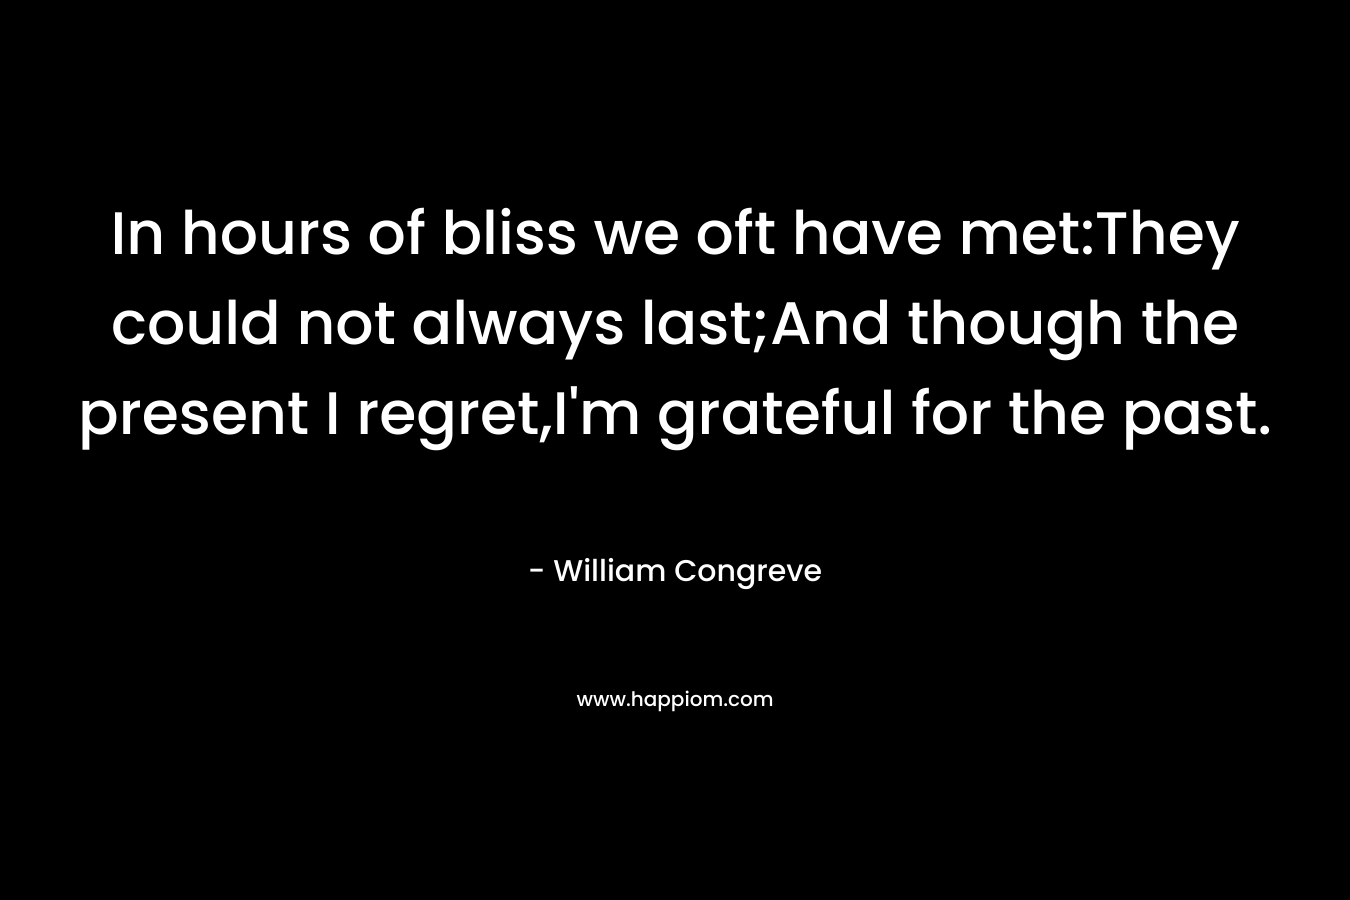 In hours of bliss we oft have met:They could not always last;And though the present I regret,I'm grateful for the past.